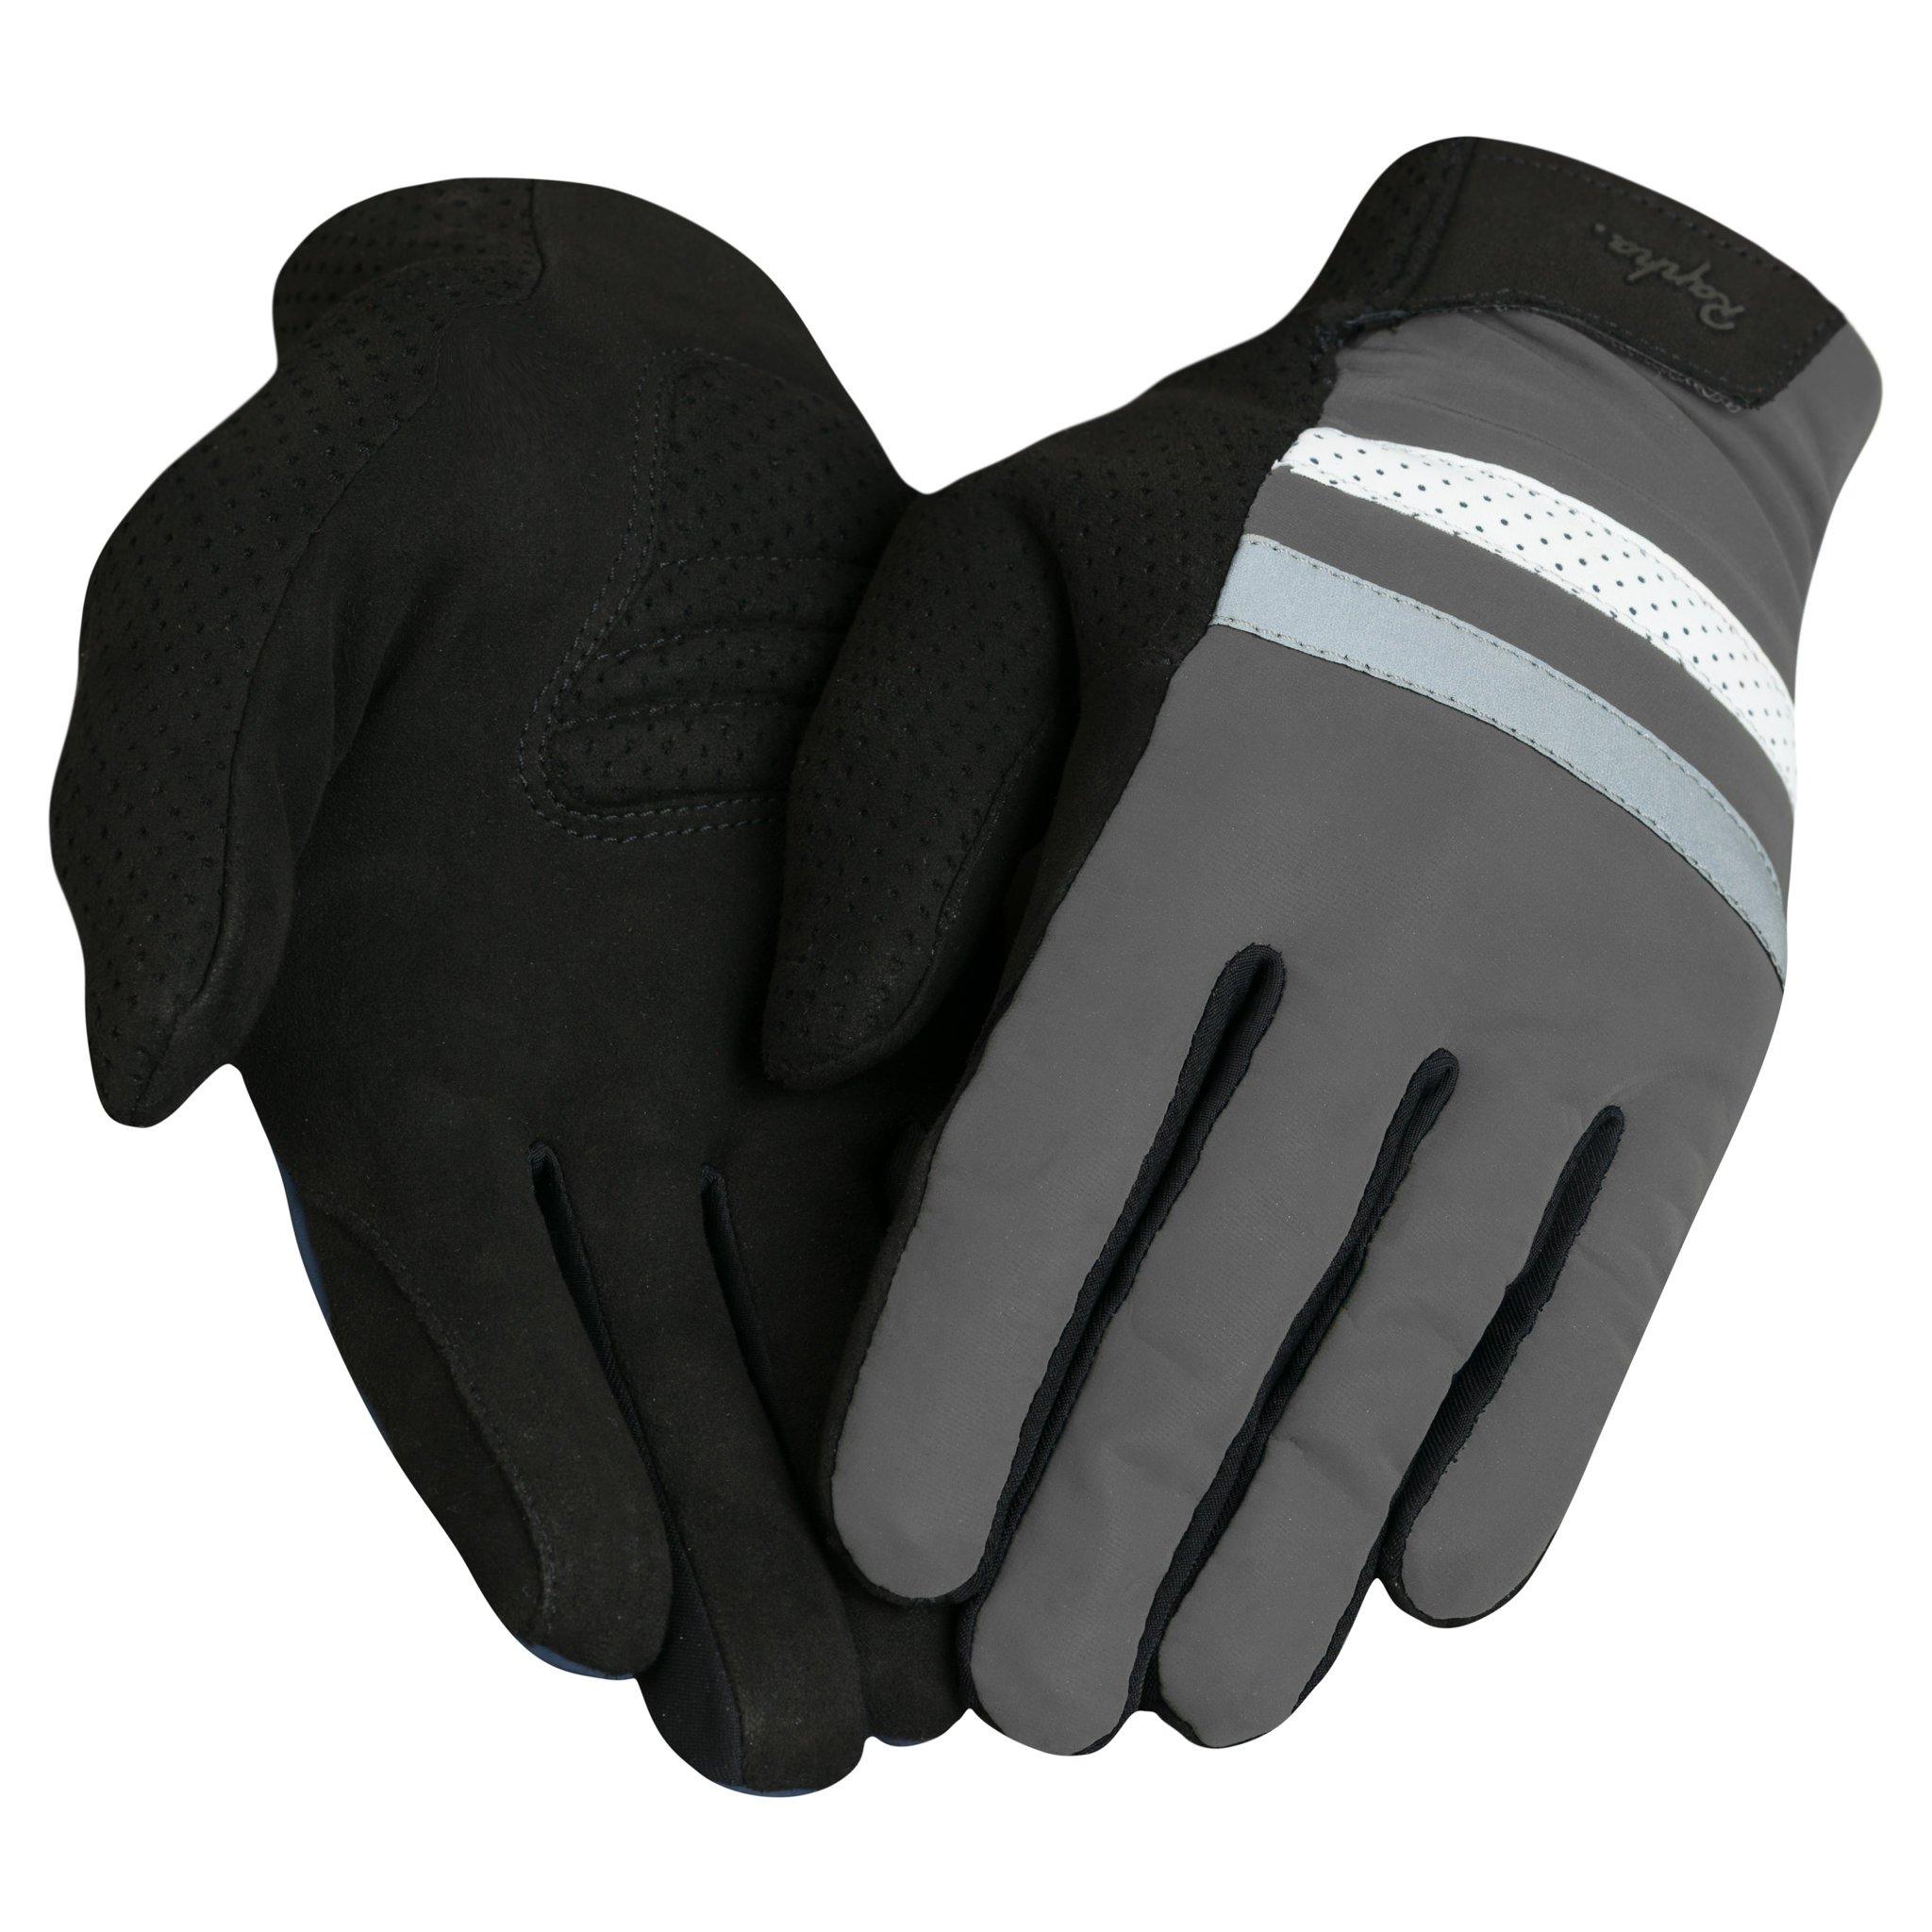 Commuting Rapha Reflective Gloves | Reflective Cycling for Winter | Men\'s Gloves and Brevet Riding